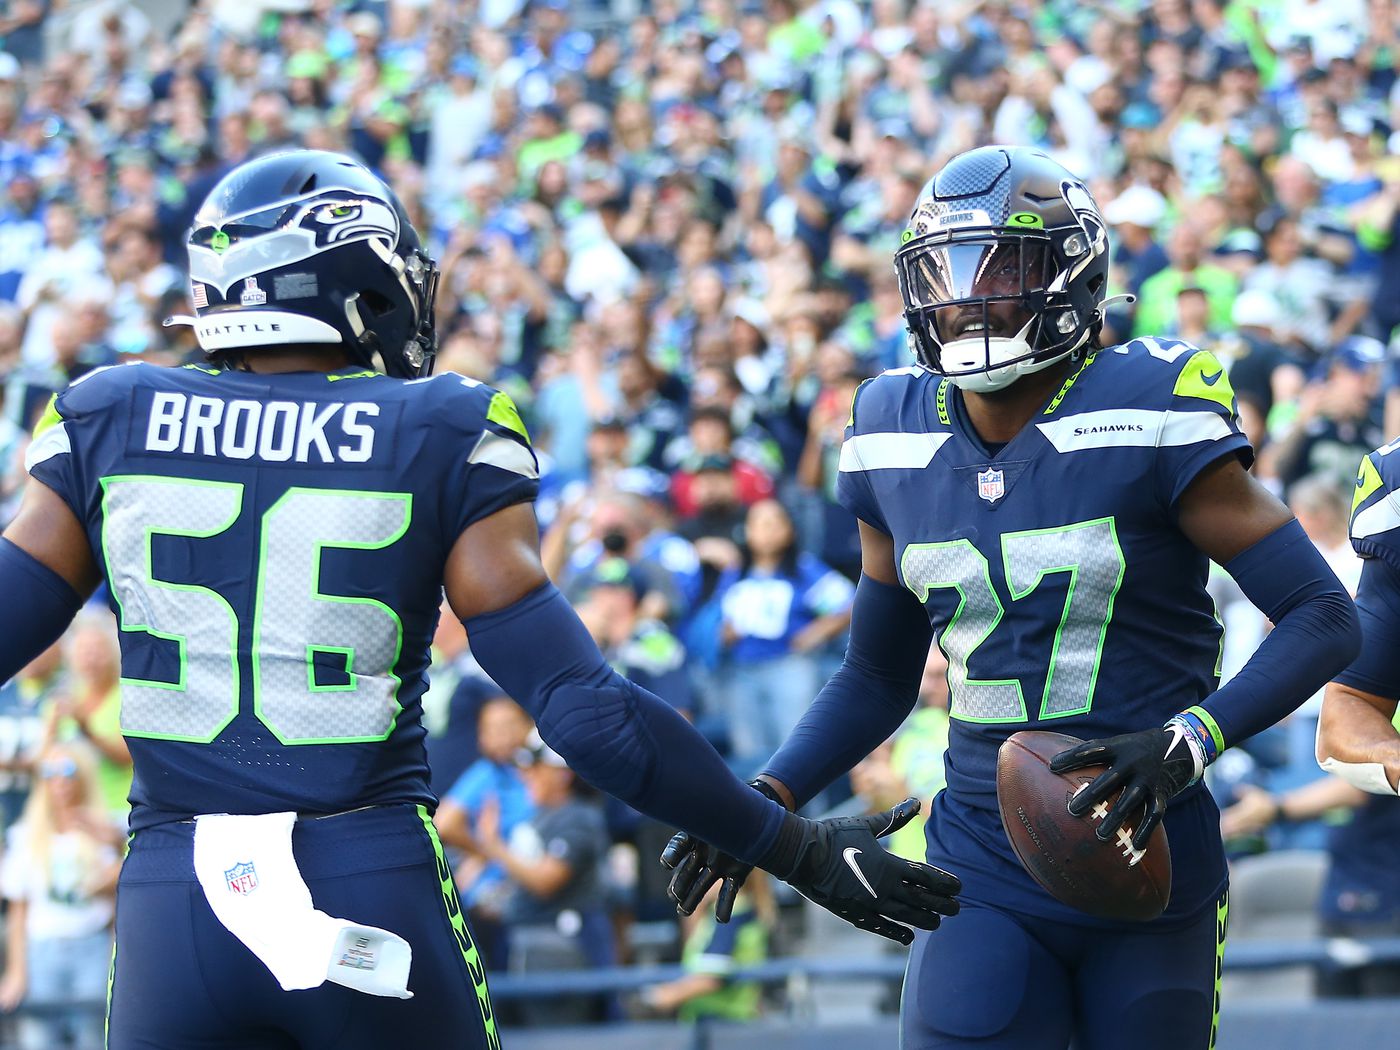 Seahawks found the fix for their defense against Cardinals but offense  could've been sharper